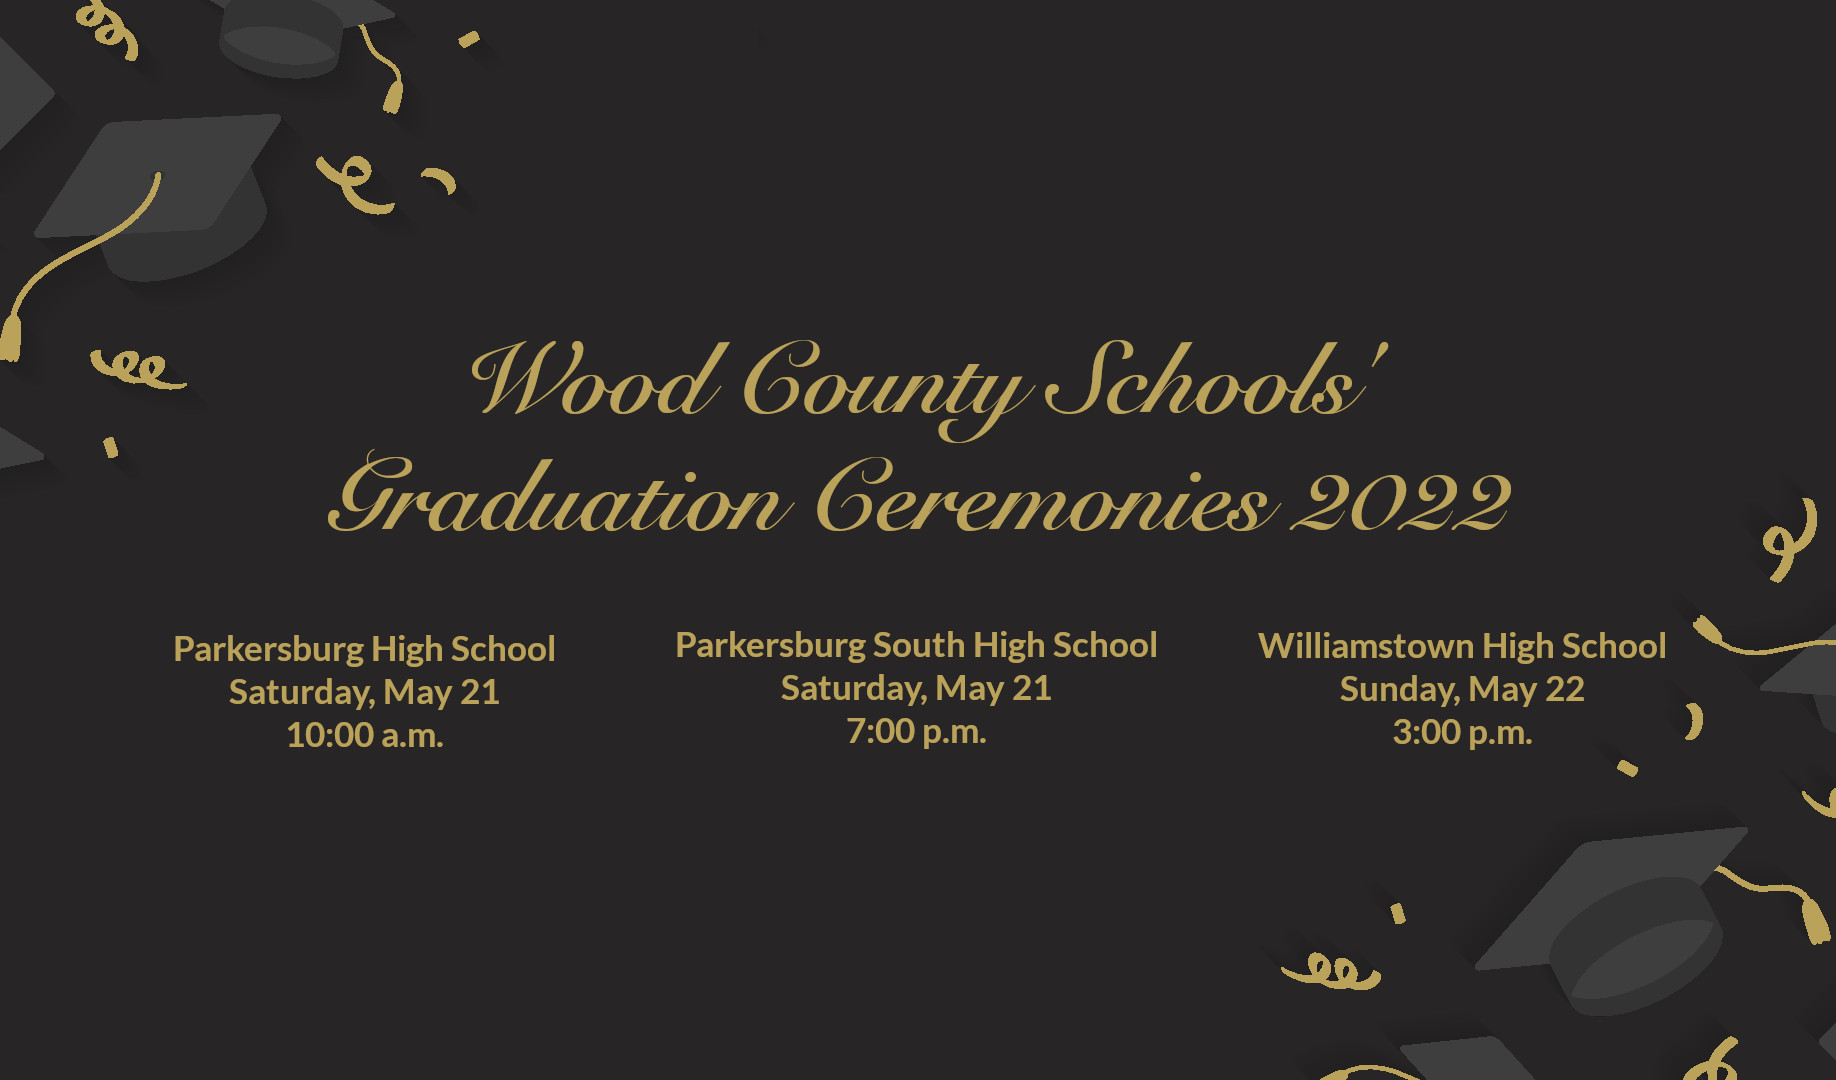 wood county schools' graduation ceremonies dates and times